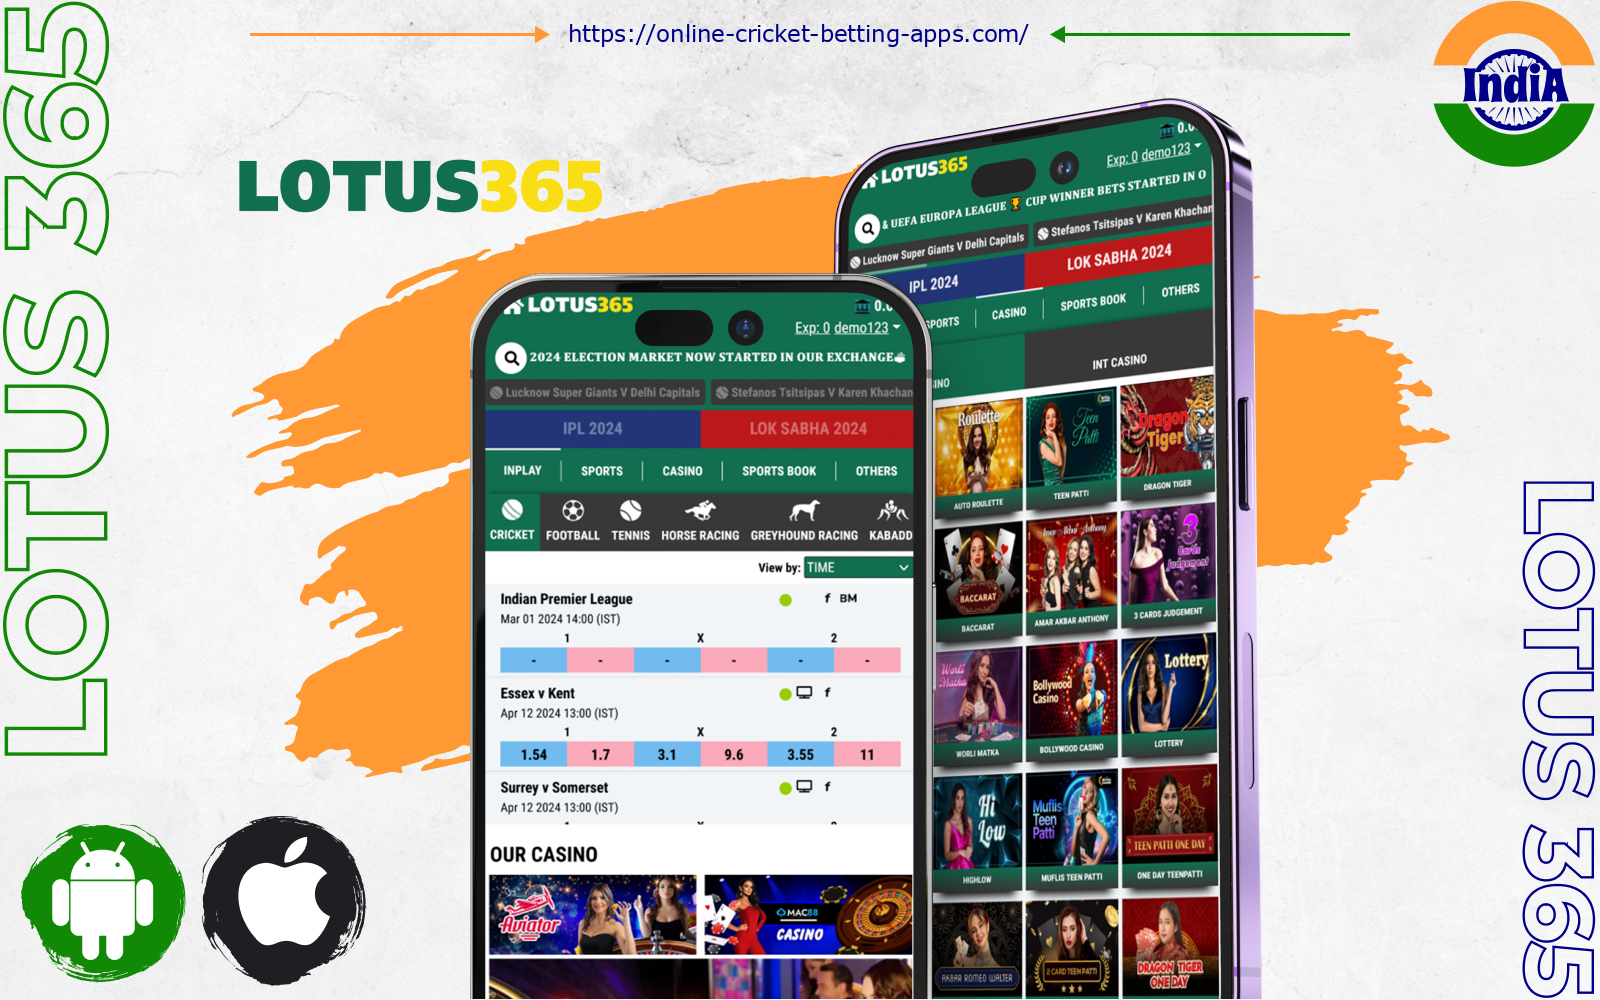 The excellent and user-friendly design in the Lotus 365 quick app provides a lot of pleasurable experience for Indians